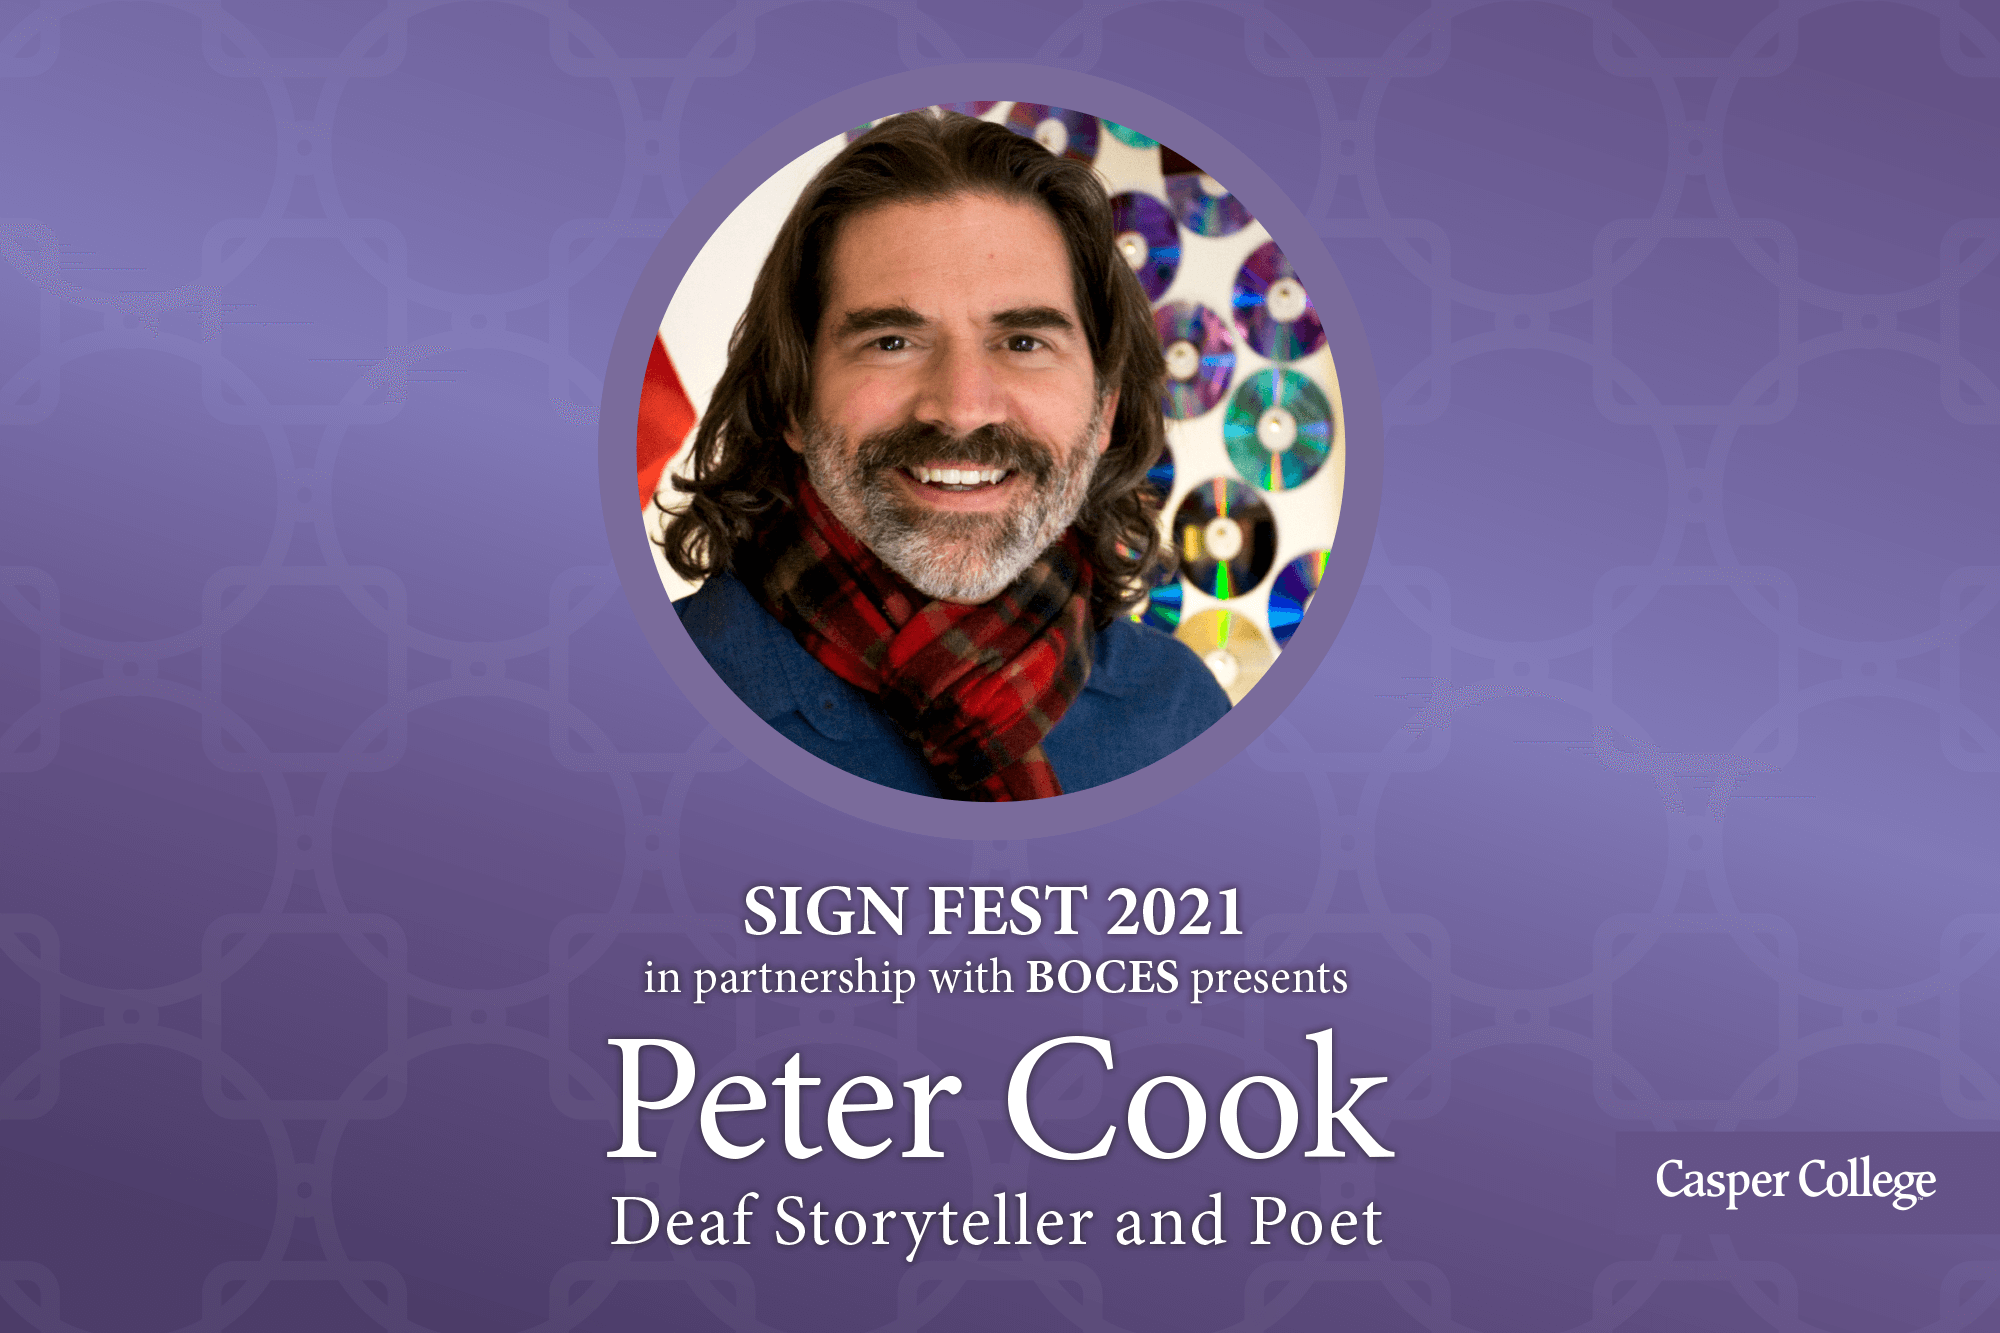 Photo of Peter Cook with the words "Sign Fest 2021."